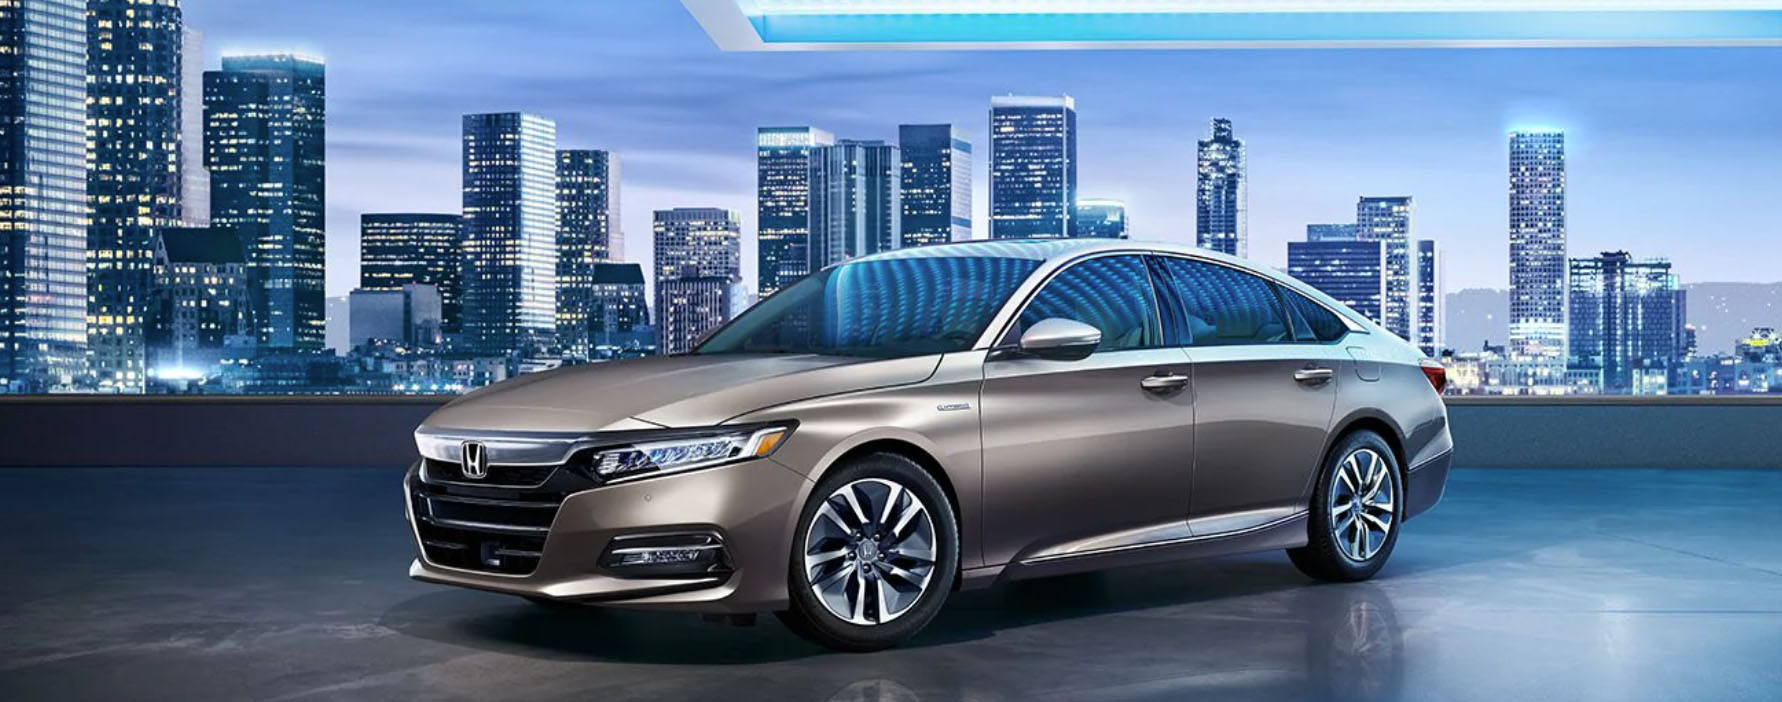 2020 Honda Accord For Sale in Golden